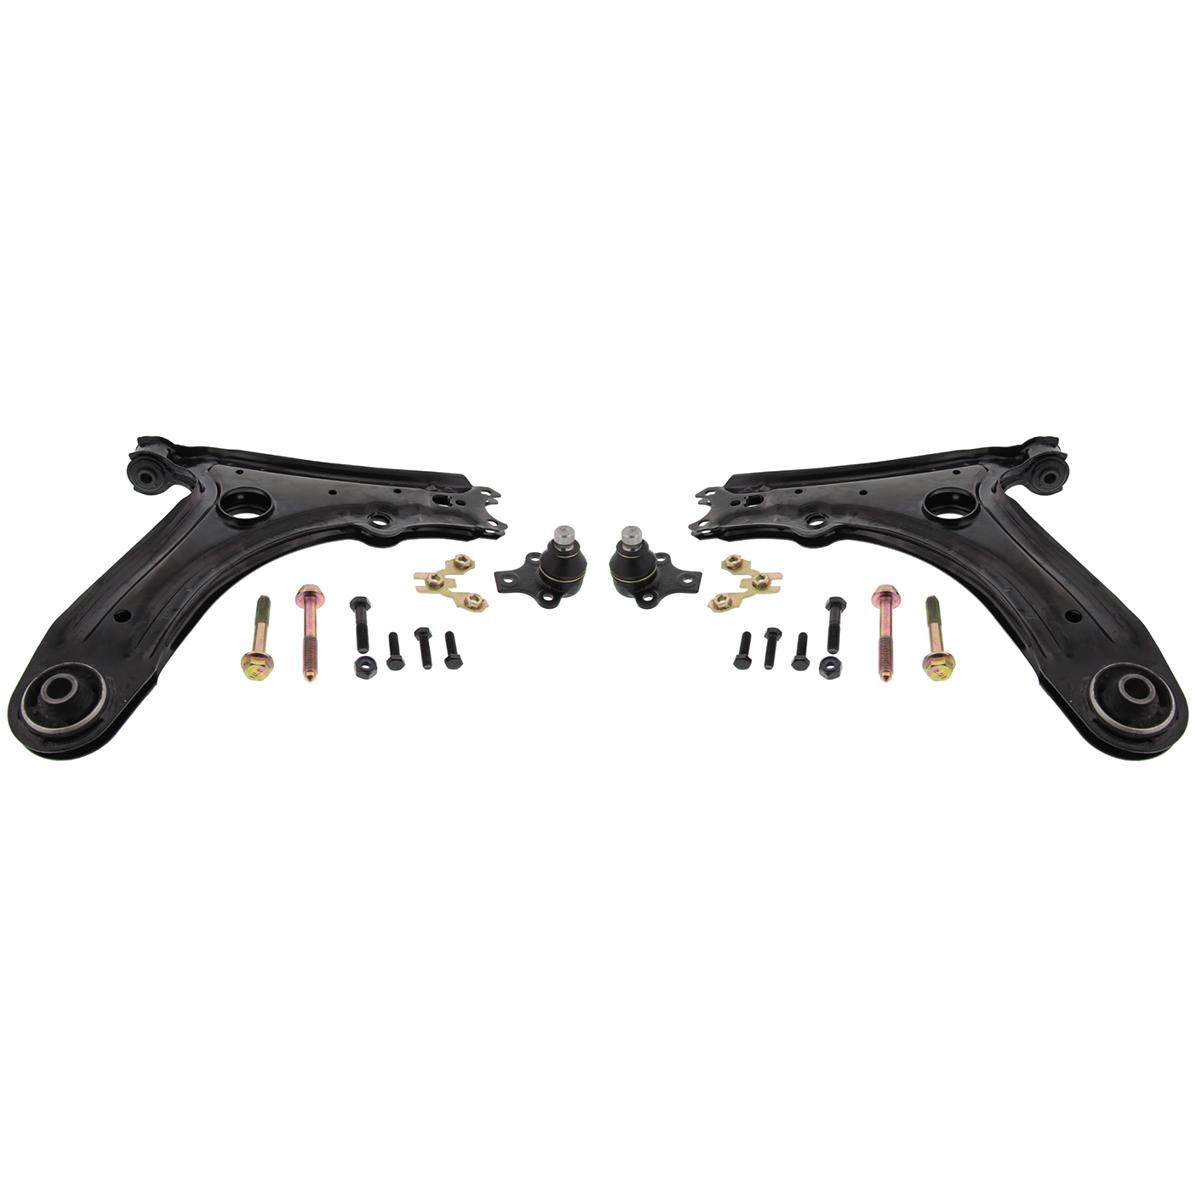 Wishbone set including reinforced Coupling Bars / Steering Rods VW Golf Mk2 Jetta 2 Year of Manufacturing up to 07/1987